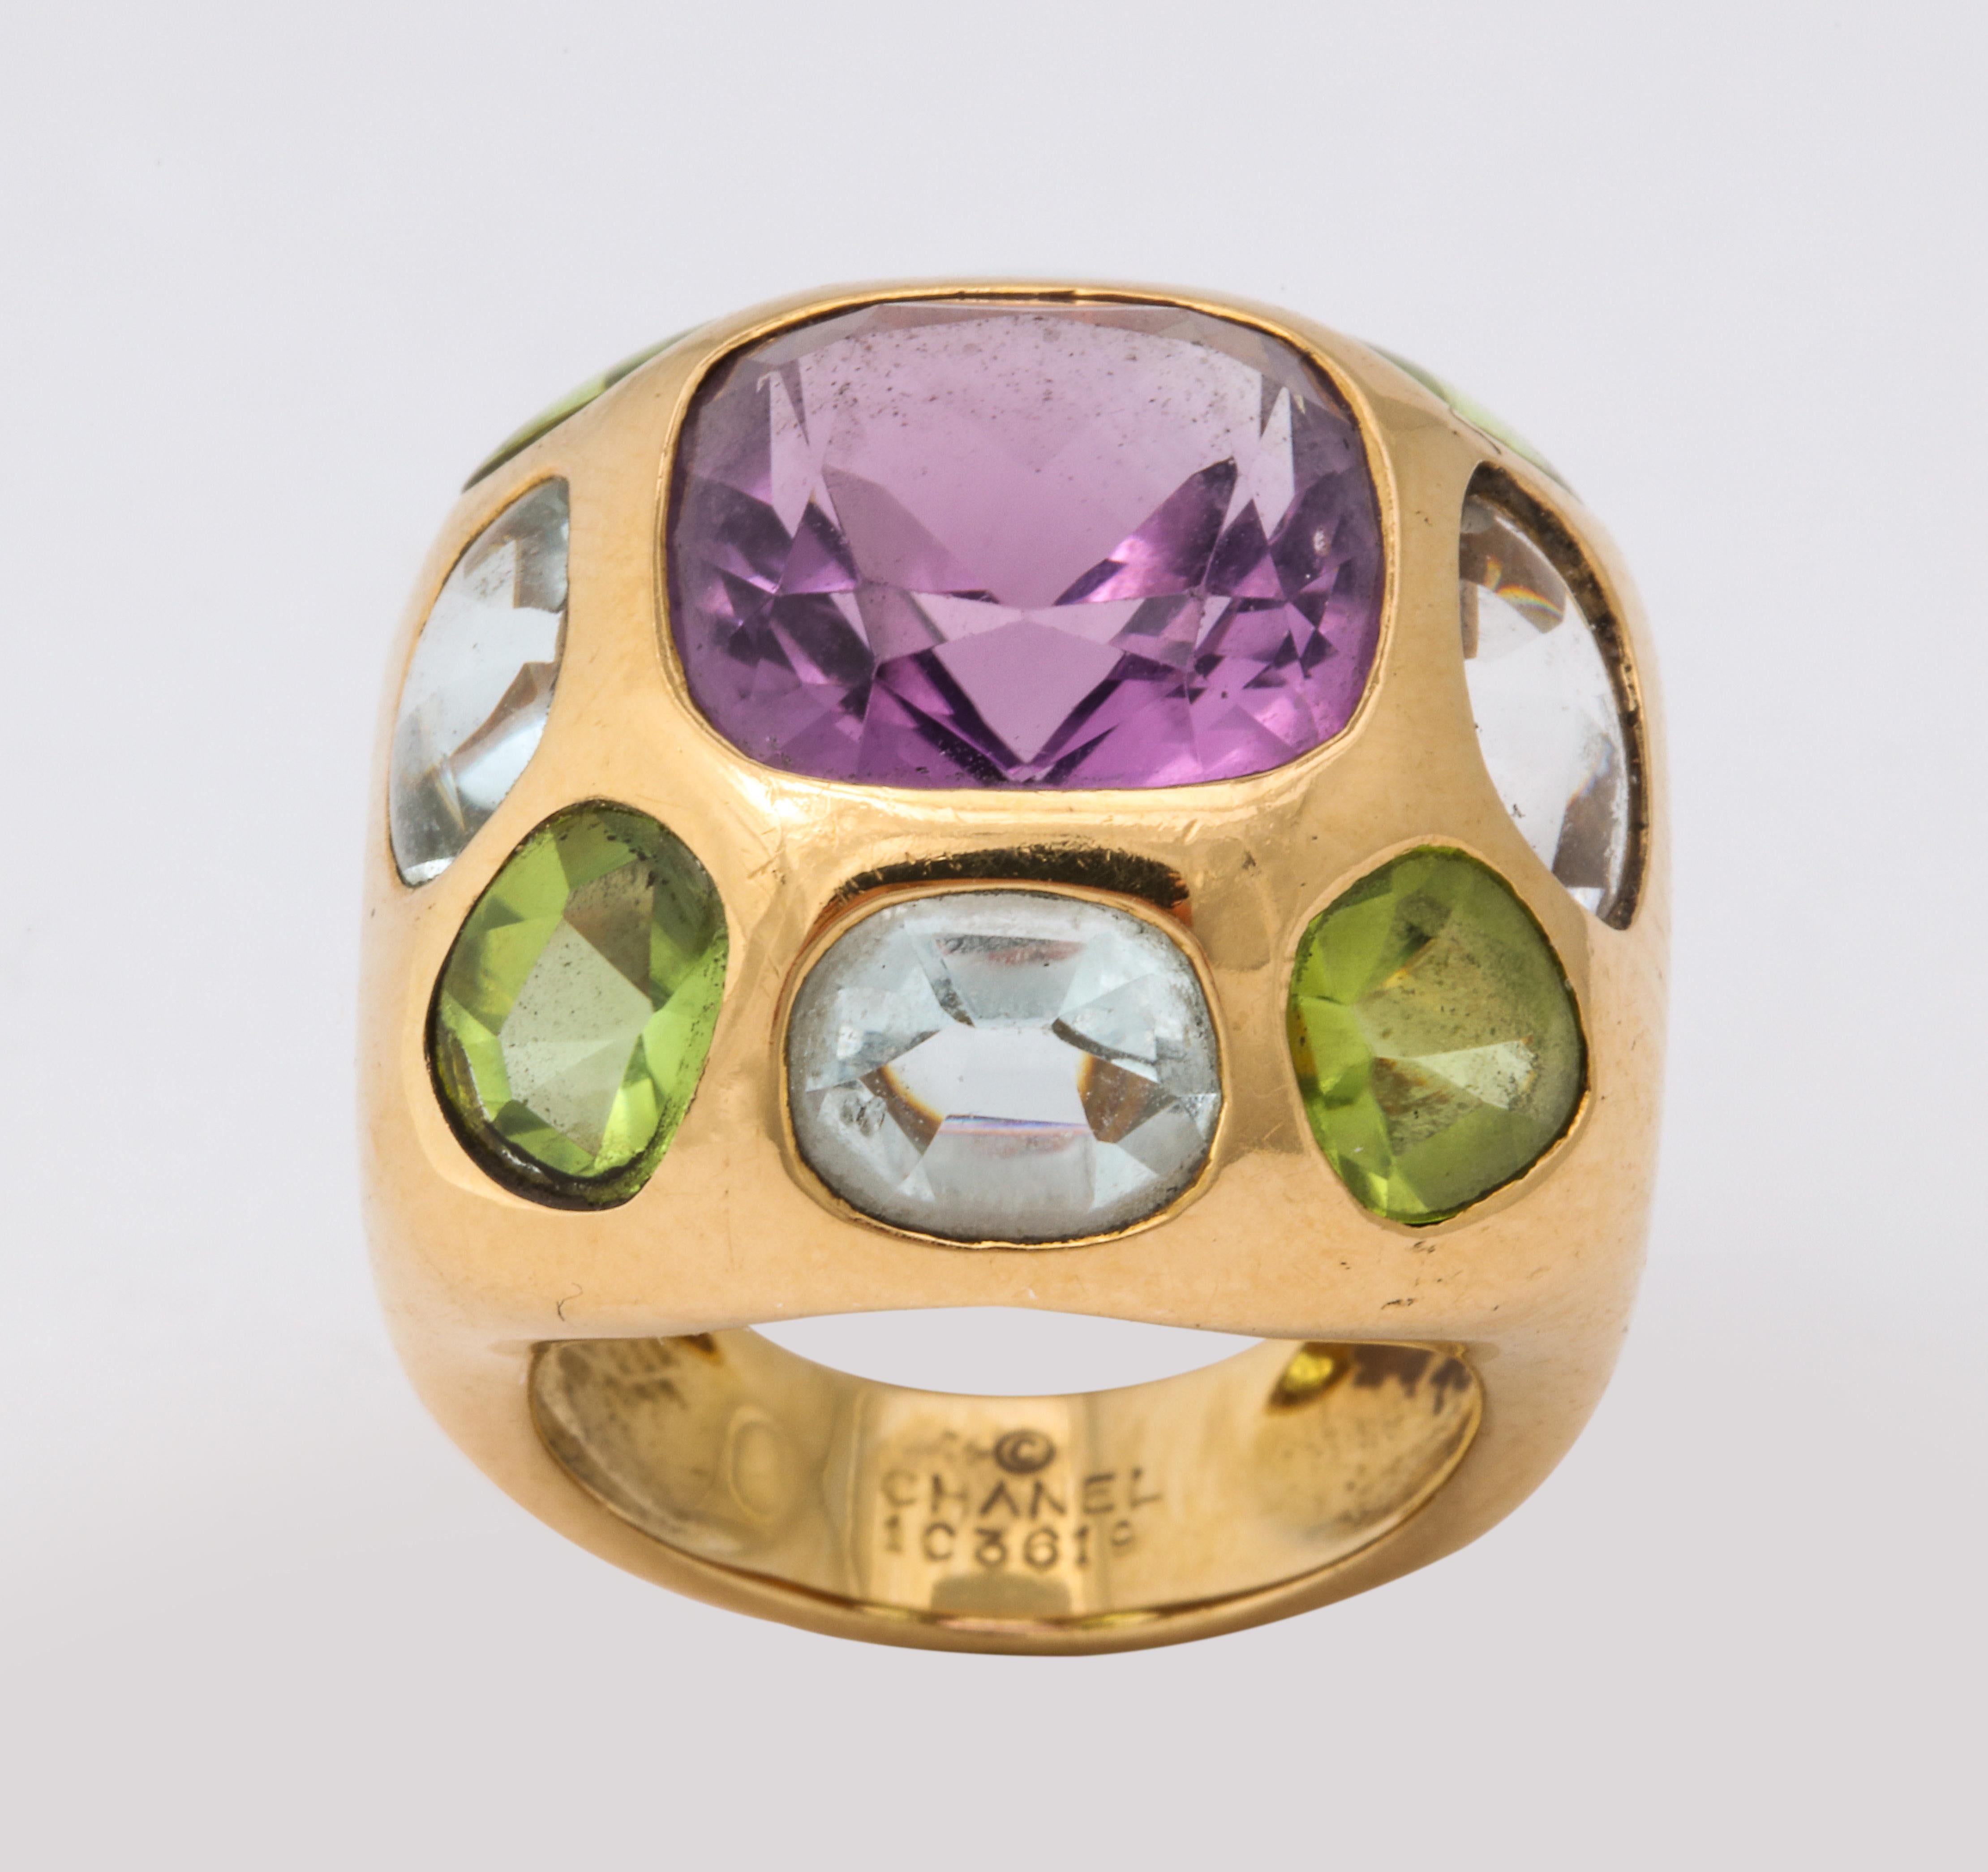 Iconic Chanel design circa 1990 featuring a central cushion cut rich, purple amethyst surrounded by aquamarine and peridot.  The surrounding stones are uniquely cut with buff top smooth surfaces.  Signed and numbered with proper French